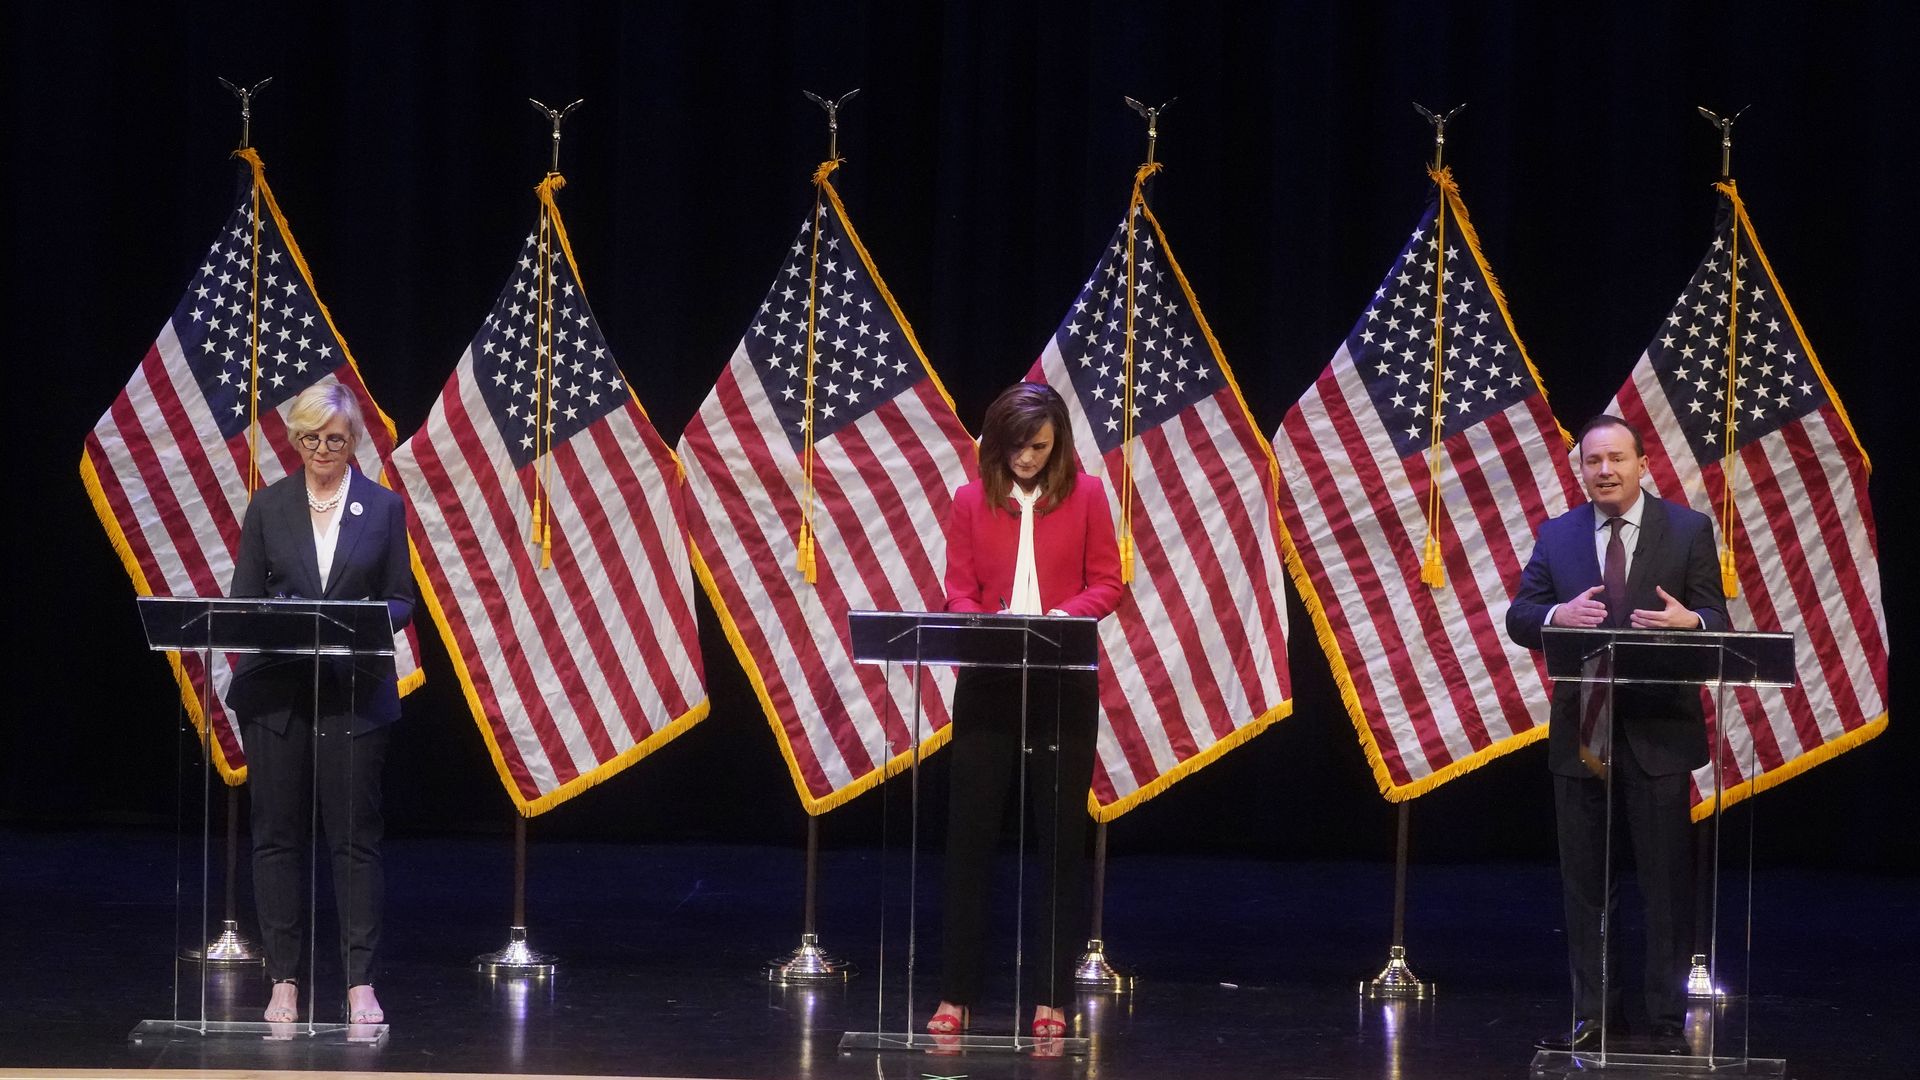 Three U.S. Senate candidates behind podiums and American flags.